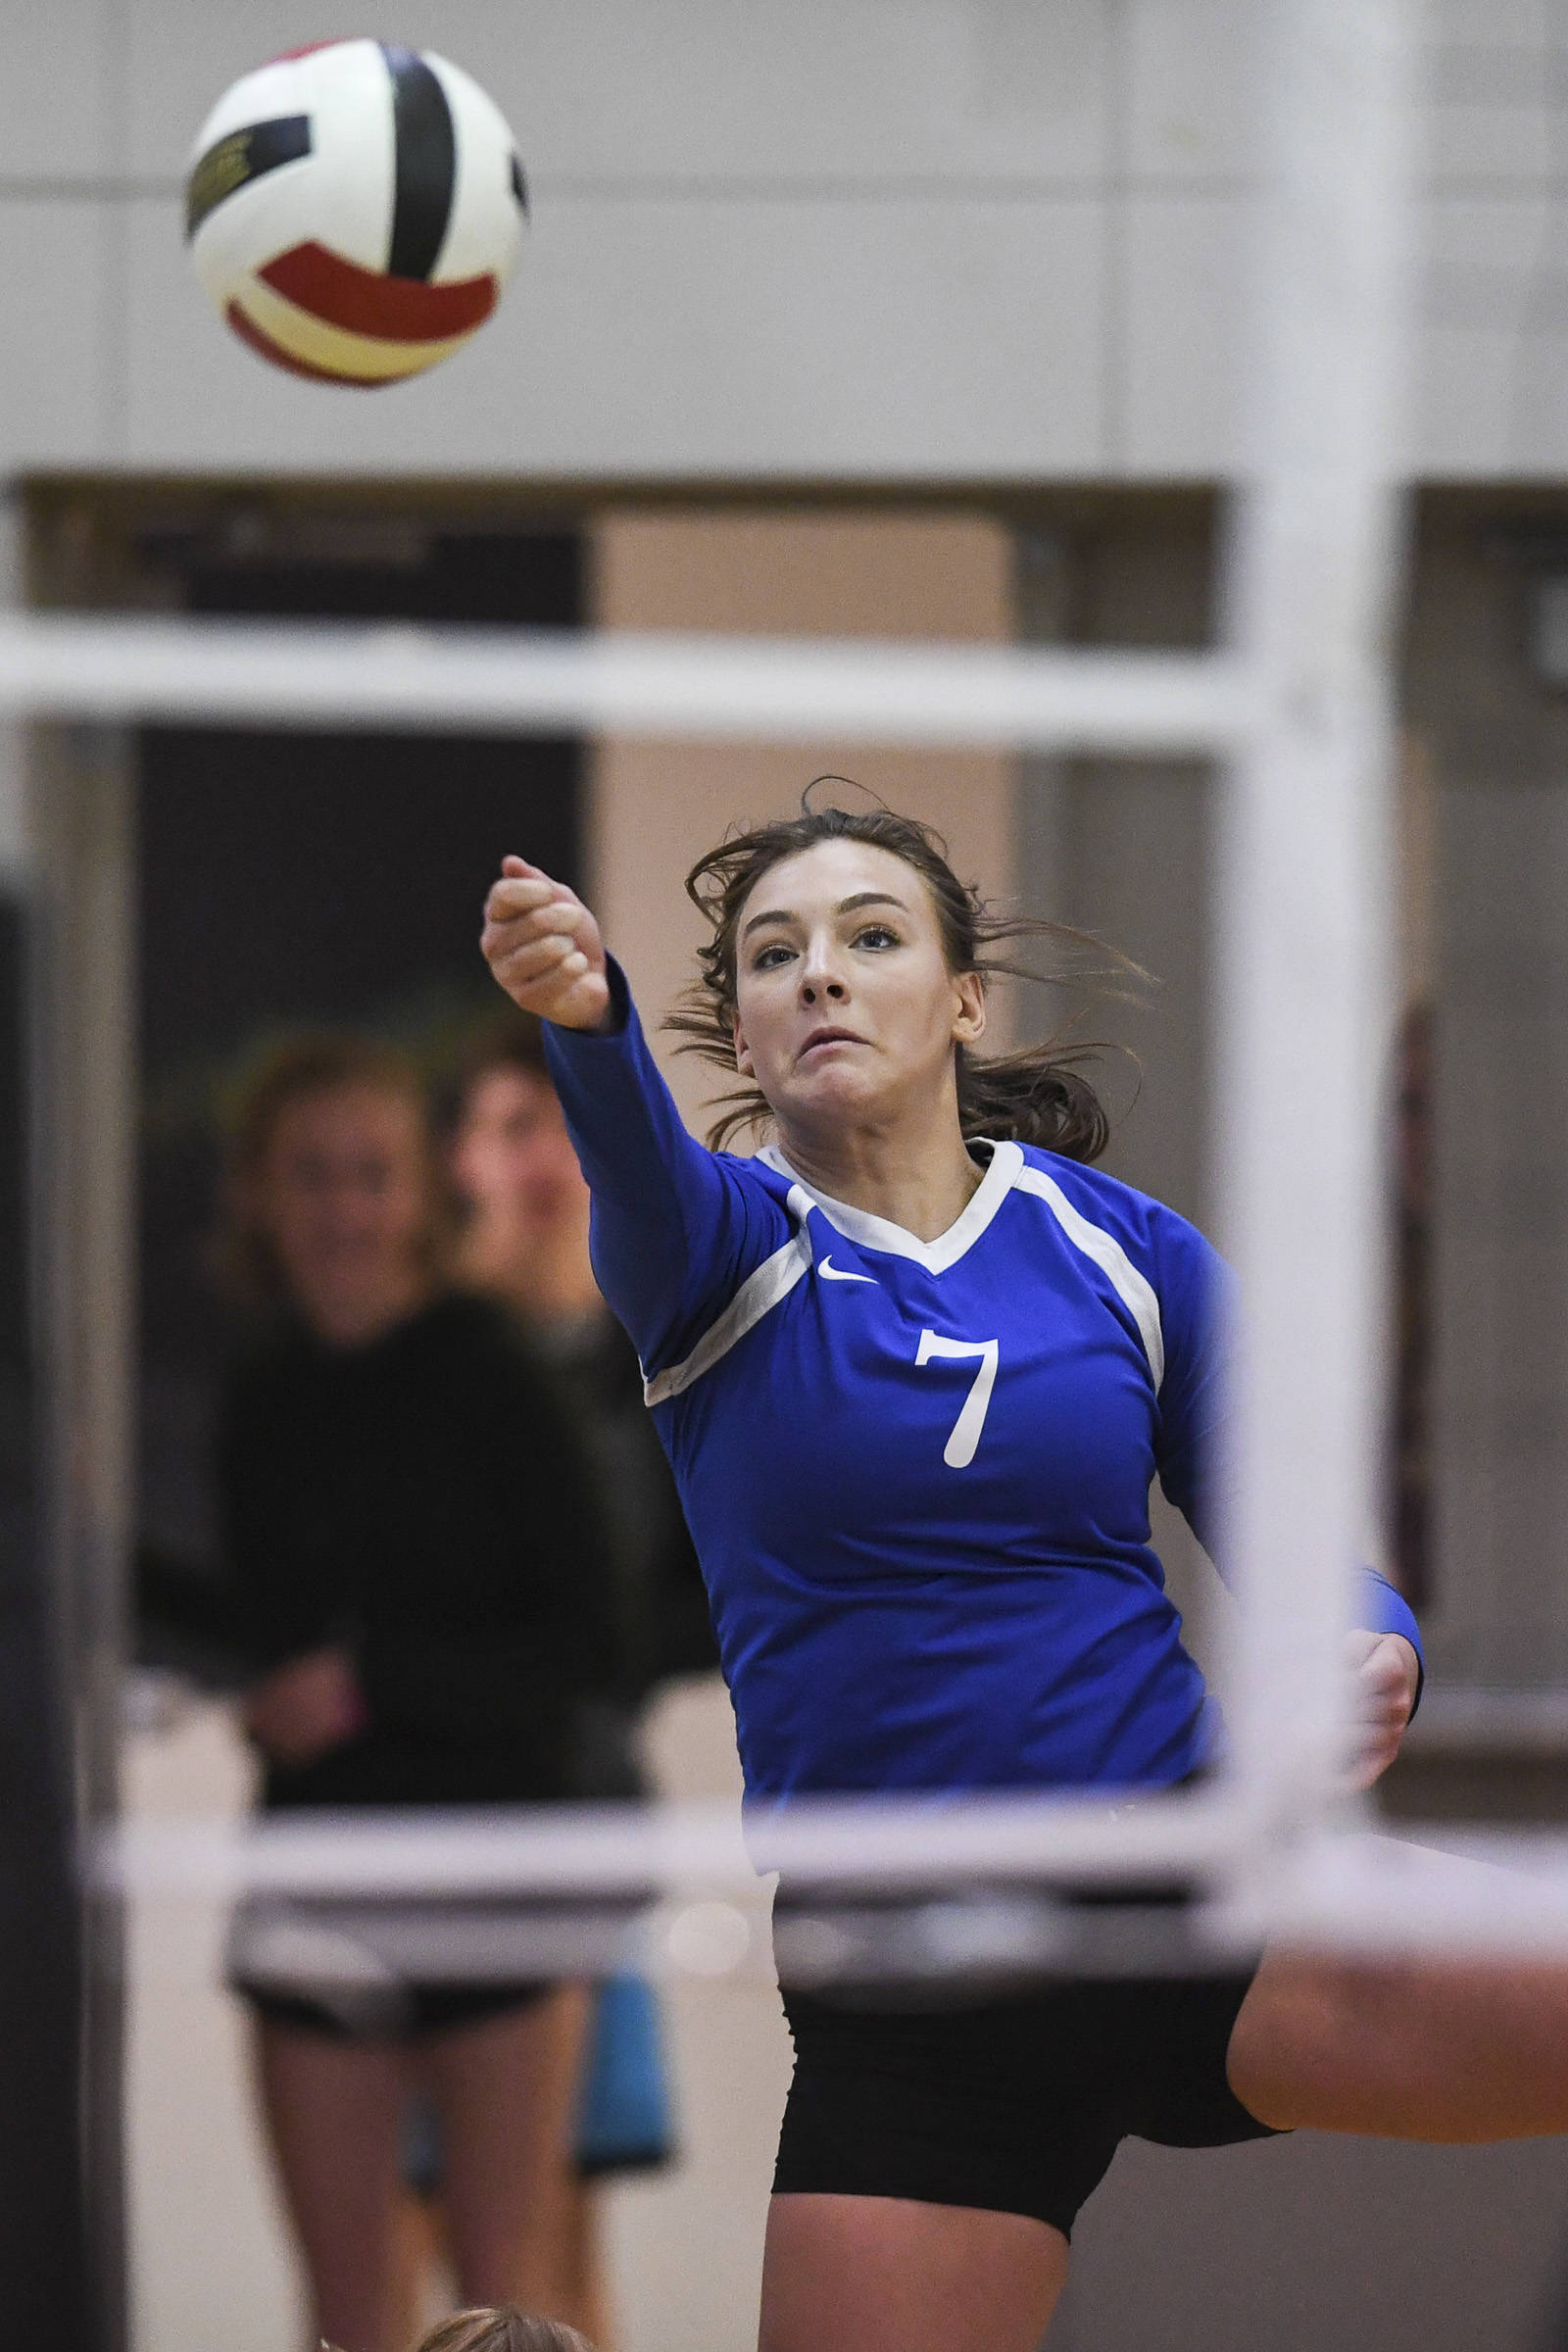 Thunder Mountain’s Avery Kreischer chases the ball against Juneau-Douglas at the Volleyball Jamboree at Juneau-Douglas High School: Yadaa.at Kalé on Friday, Aug. 30, 2019. (Michael Penn | Juneau Empire)